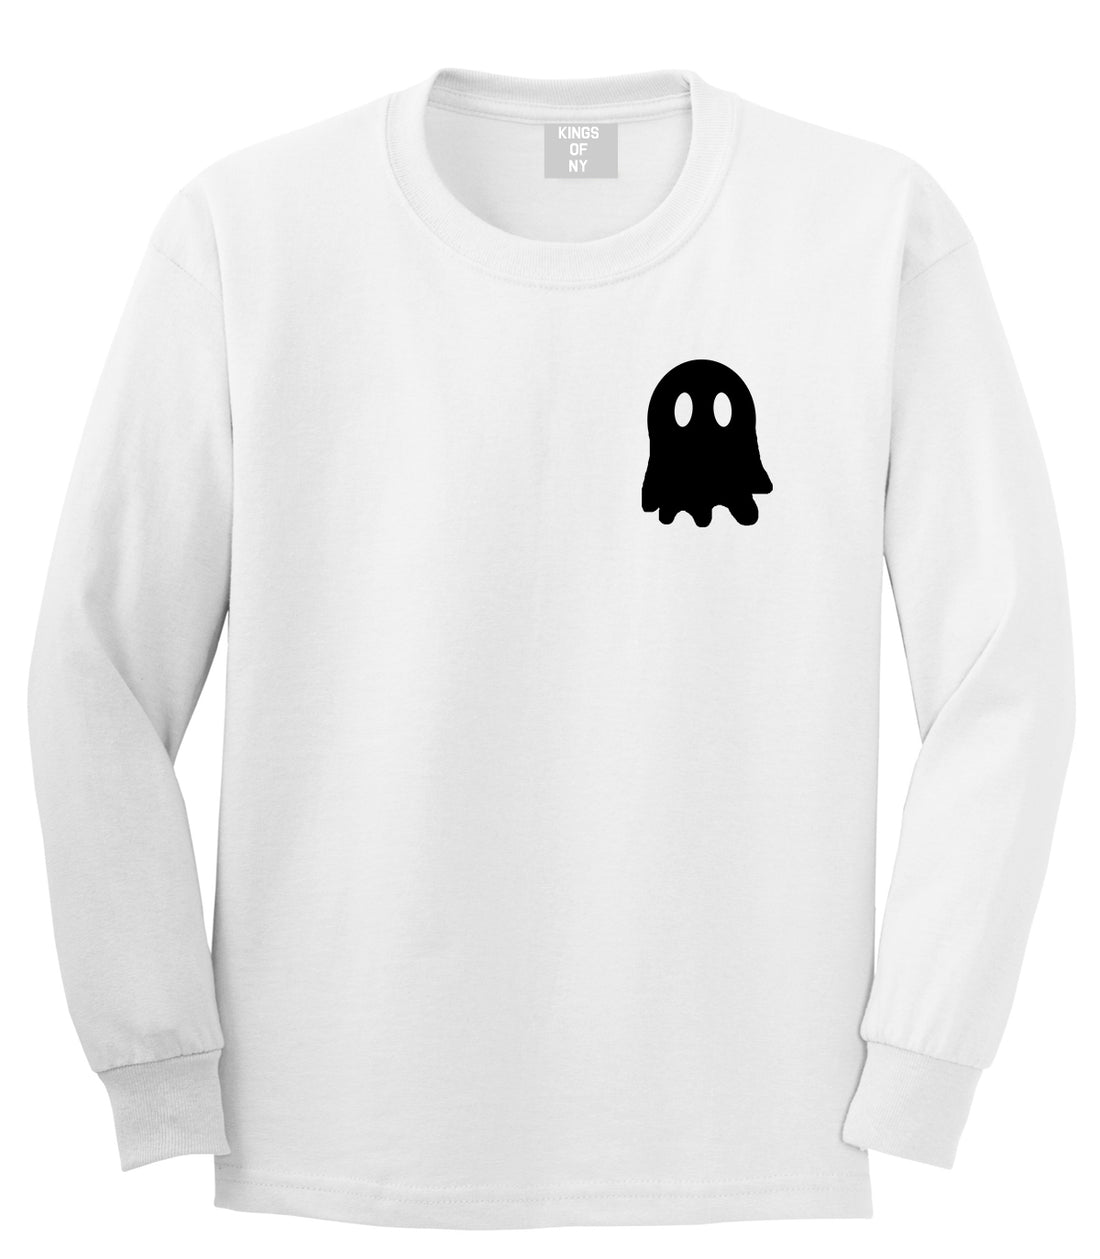 Ghost Chest Mens White Long Sleeve T-Shirt by KINGS OF NY